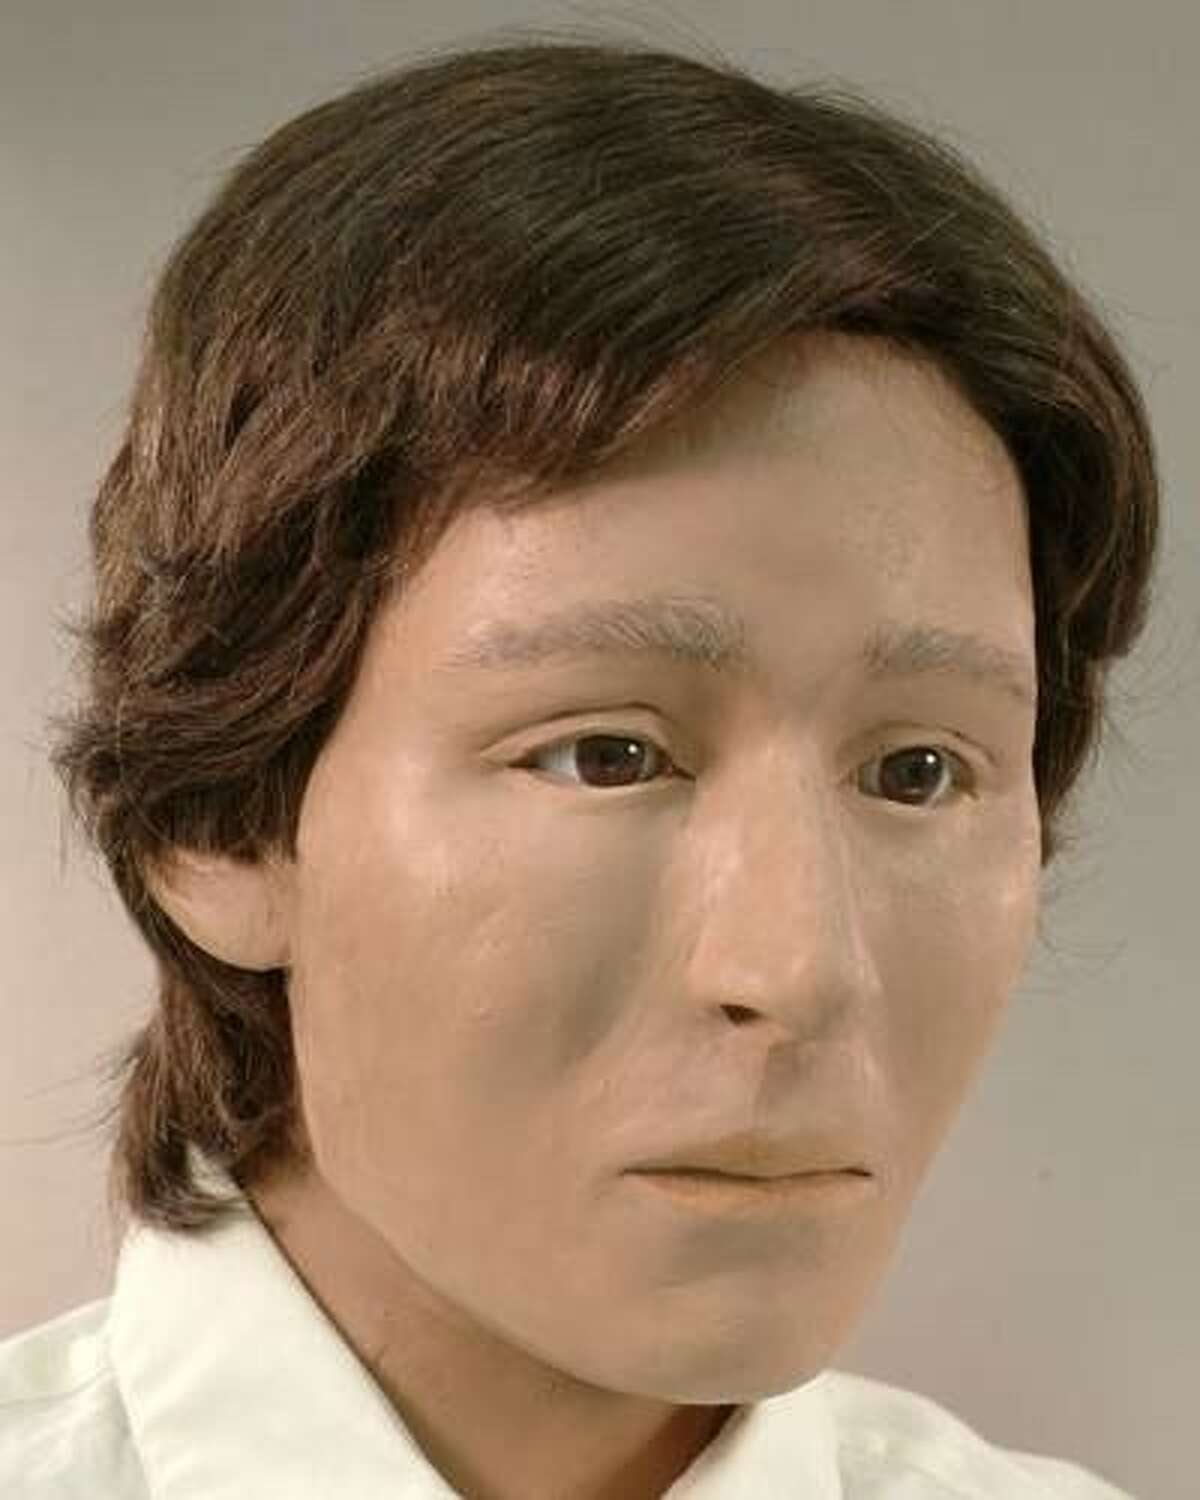 Through 21st century technology, this composite of John Houston Doe 1973 has been released by the Harris County Institute of Sciences and the National Center for Missing and Exploited Children.